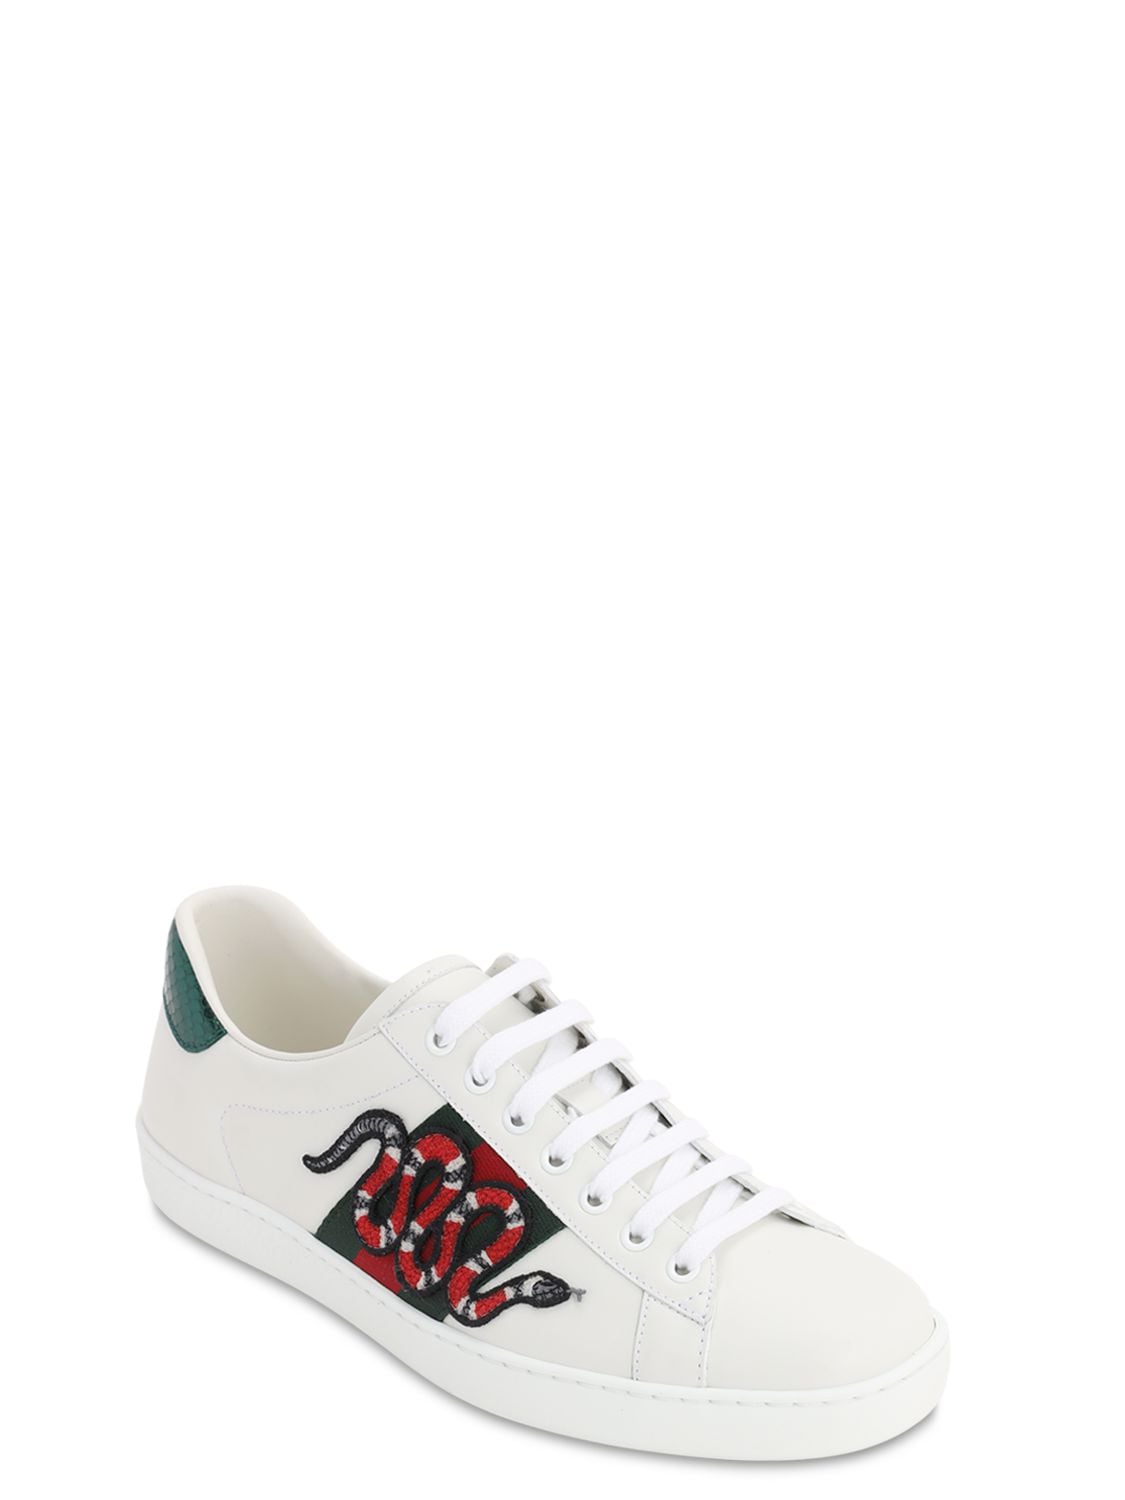 Gucci Snake Ace Embroidered Leather Sneakers In White | ModeSens